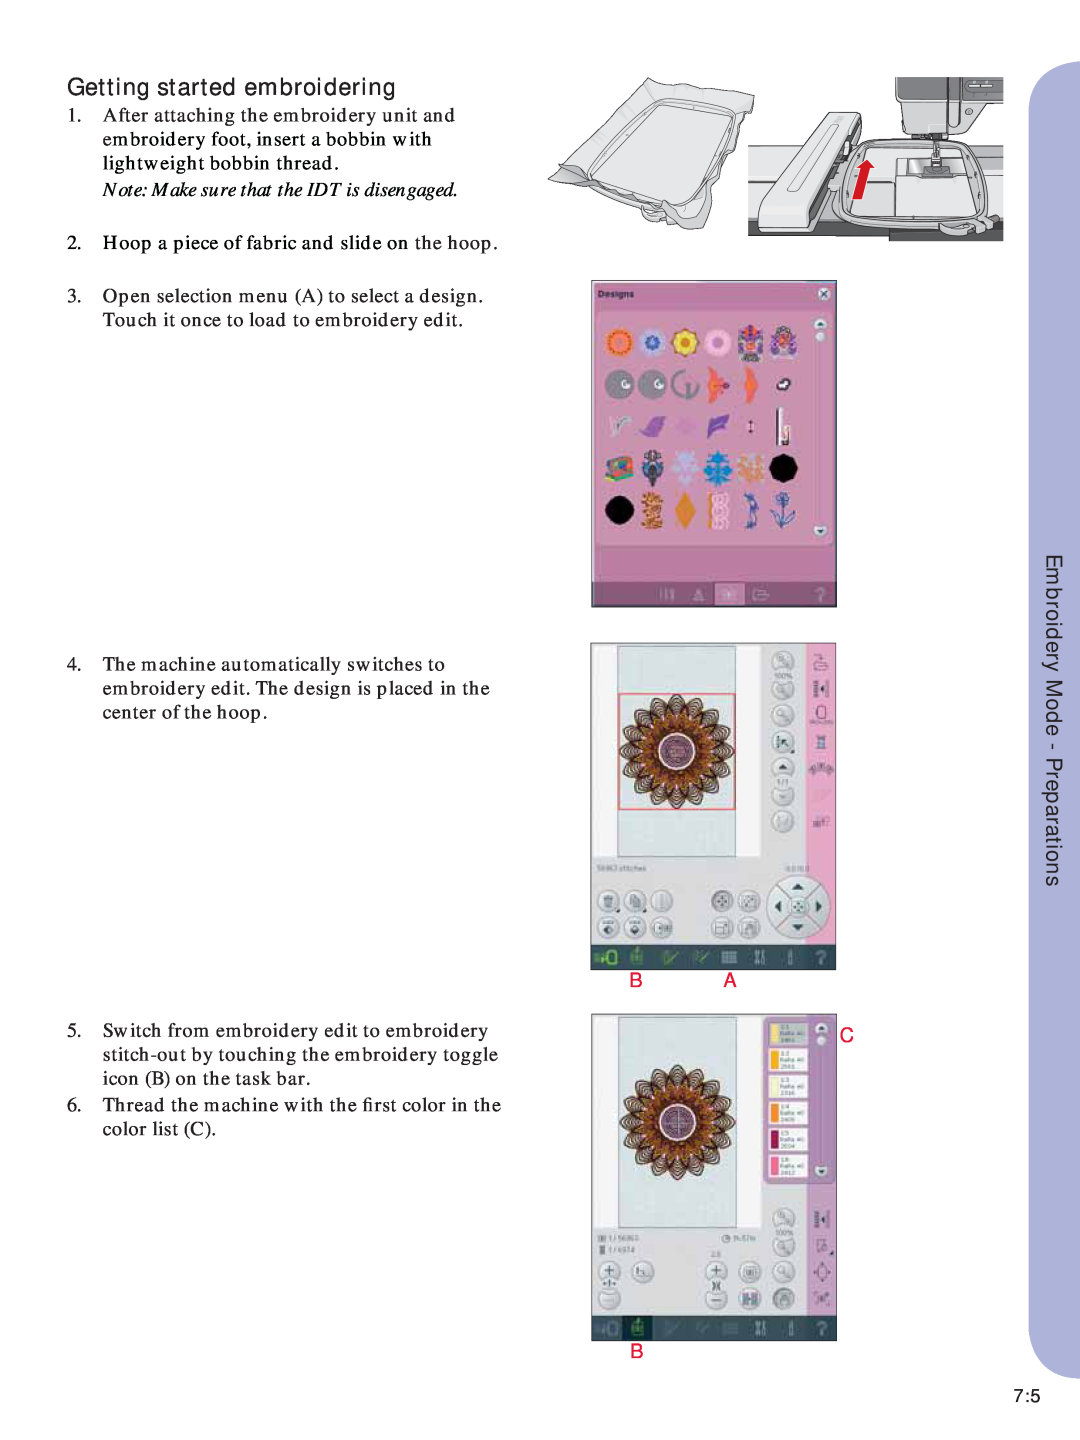 Pfaff Embroidery Machine manual Getting started embroidering, Note Make sure that the IDT is disengaged, B A B 